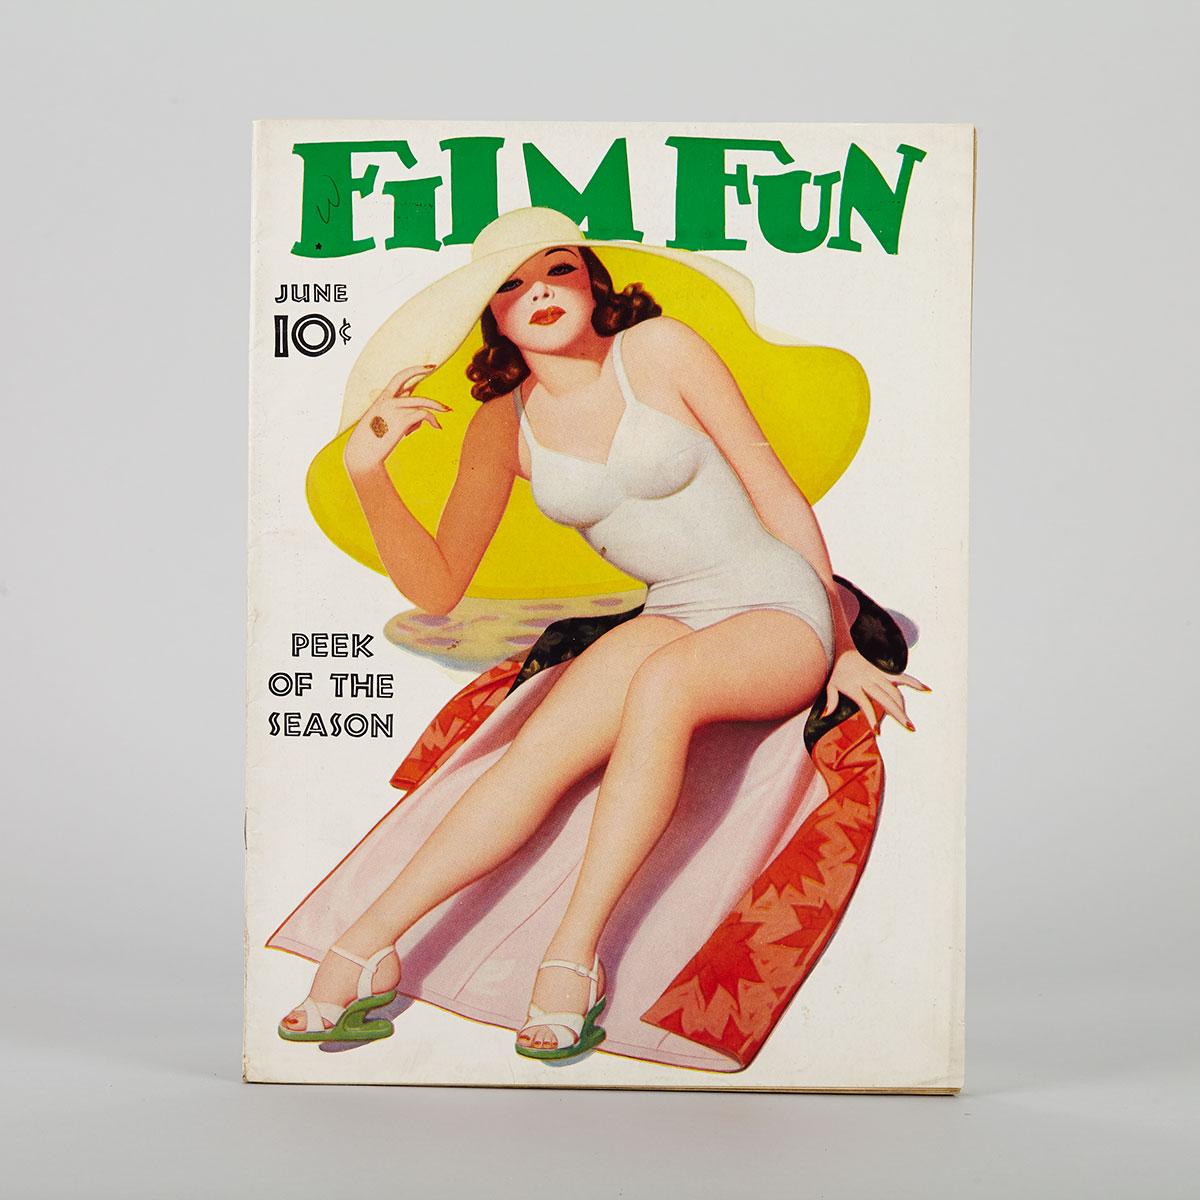 Collection of 100 Vintage Men’s Magazines, 1920’s-1950’s